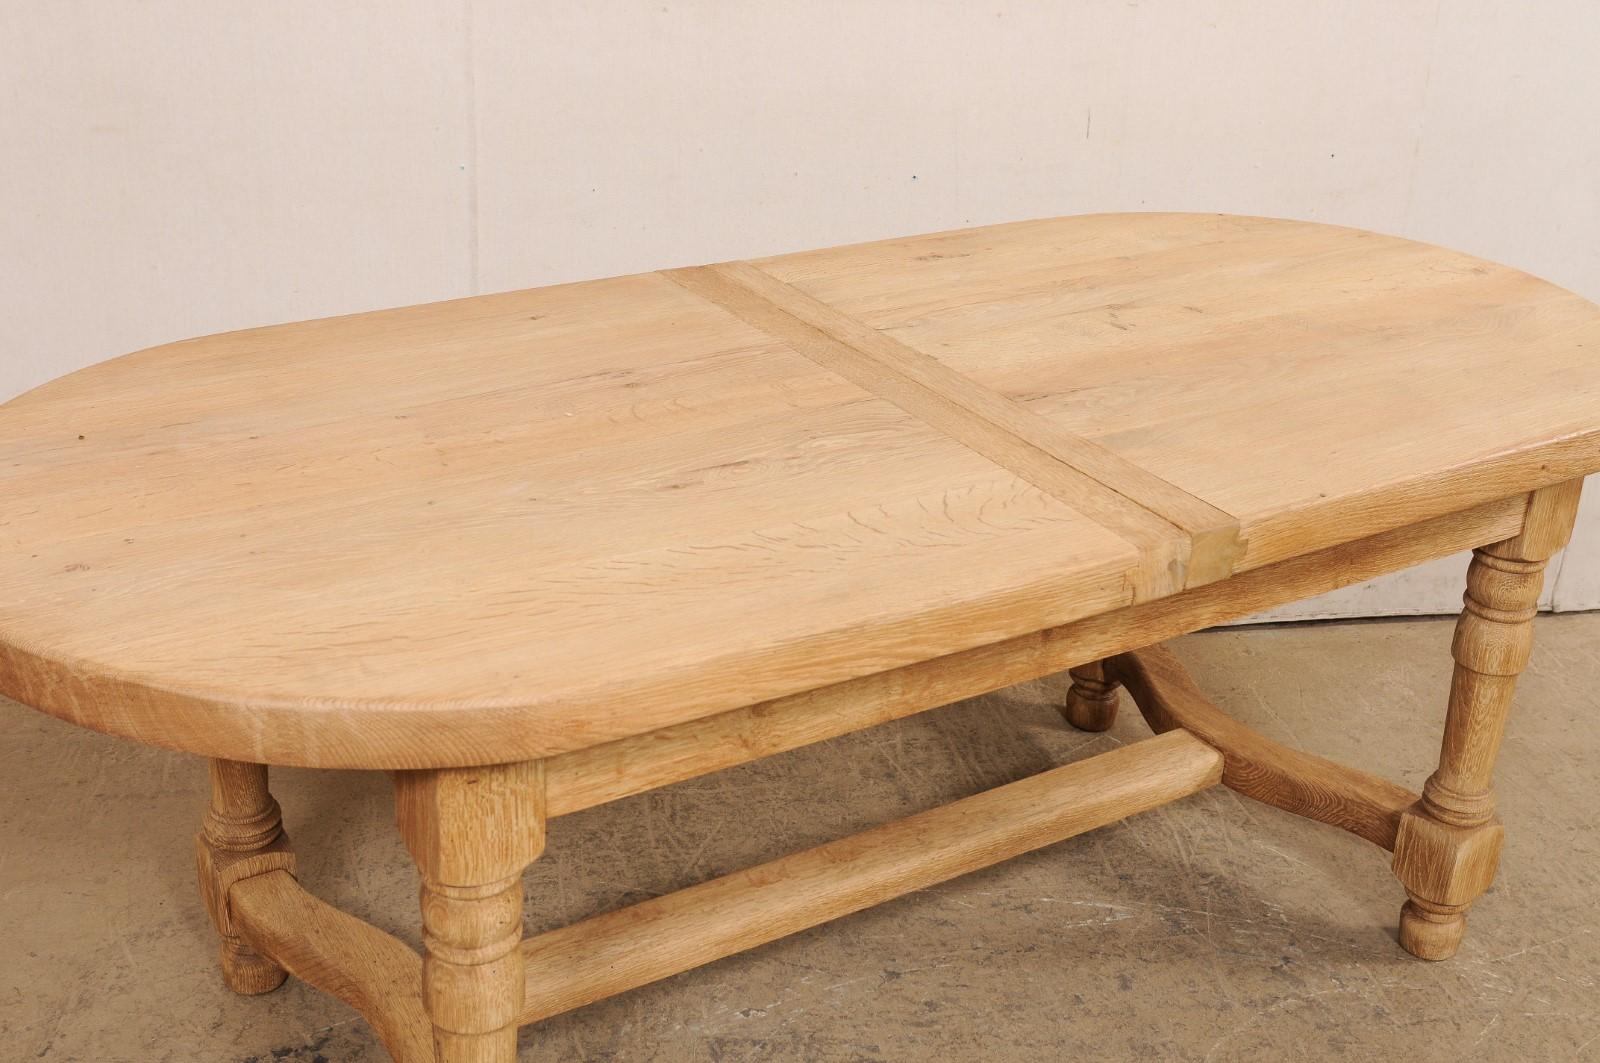 20th Century French Oval-Shaped 6.5 Ft. Long Dining Table, Mid 20th C.